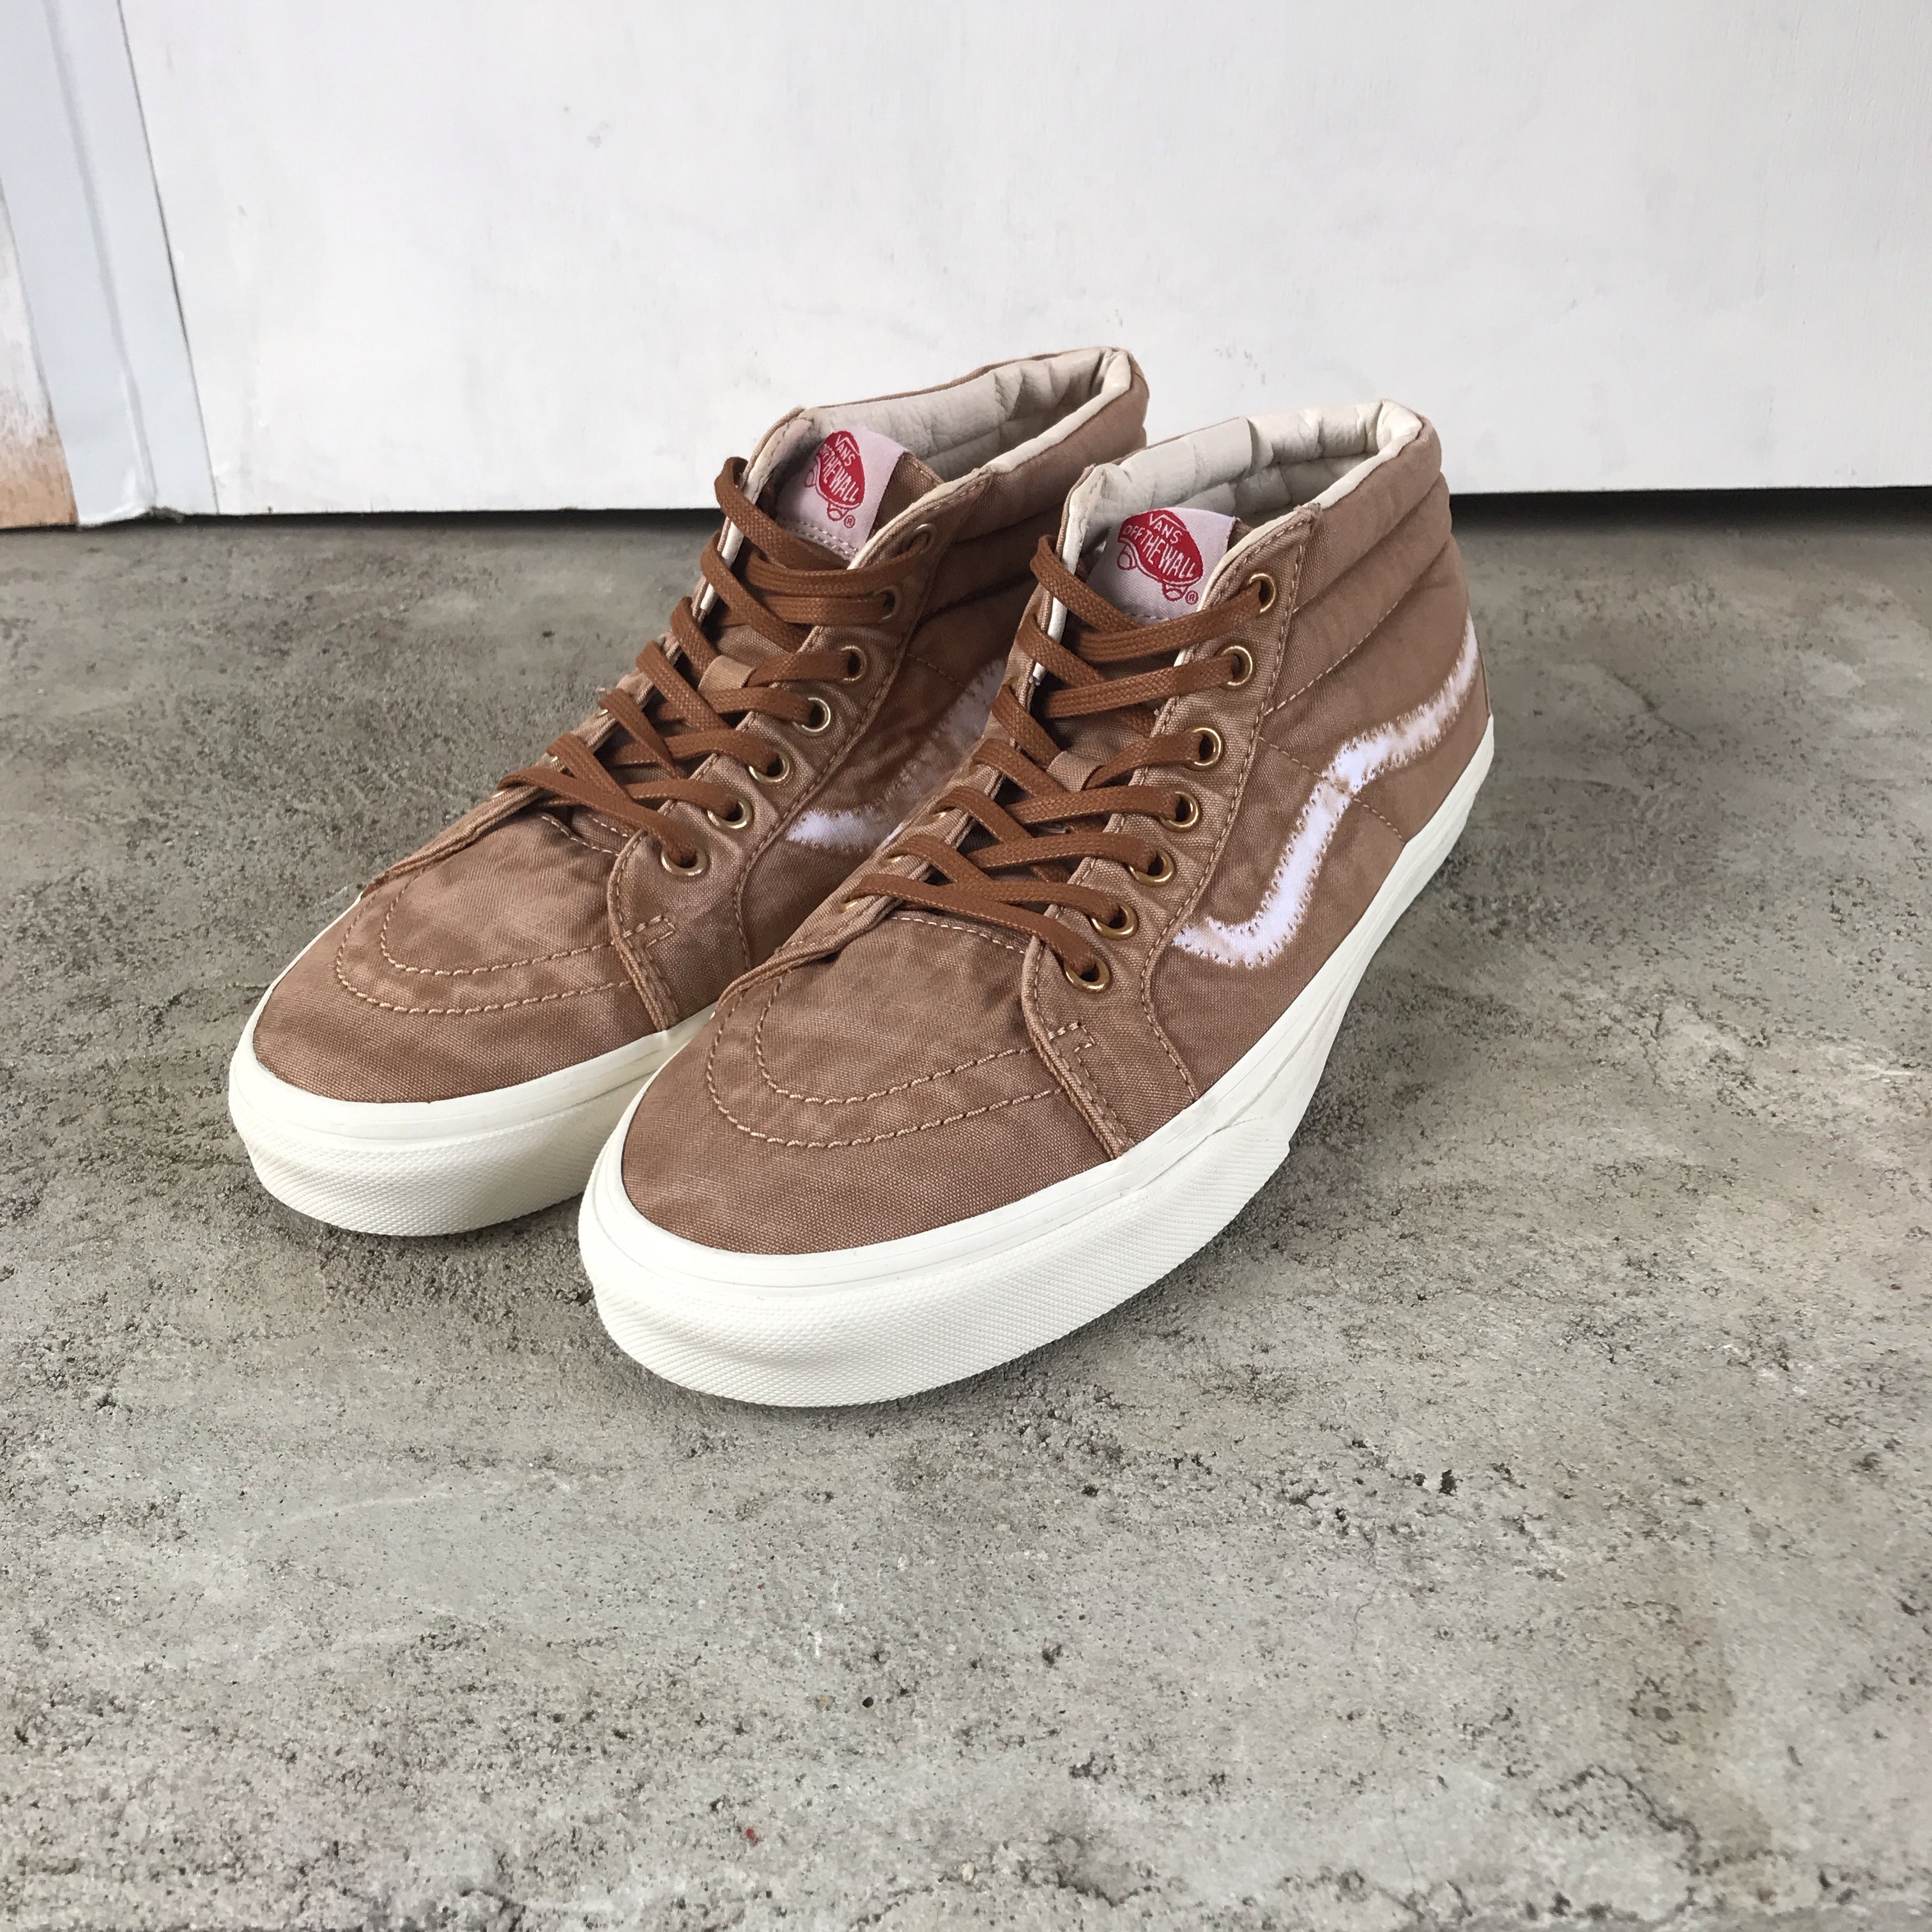 【 FINAL ONE 】Sk8-Mid Reissue CA (Vintage Sunfade) -VANS CALIFORNIA COLLECTION-